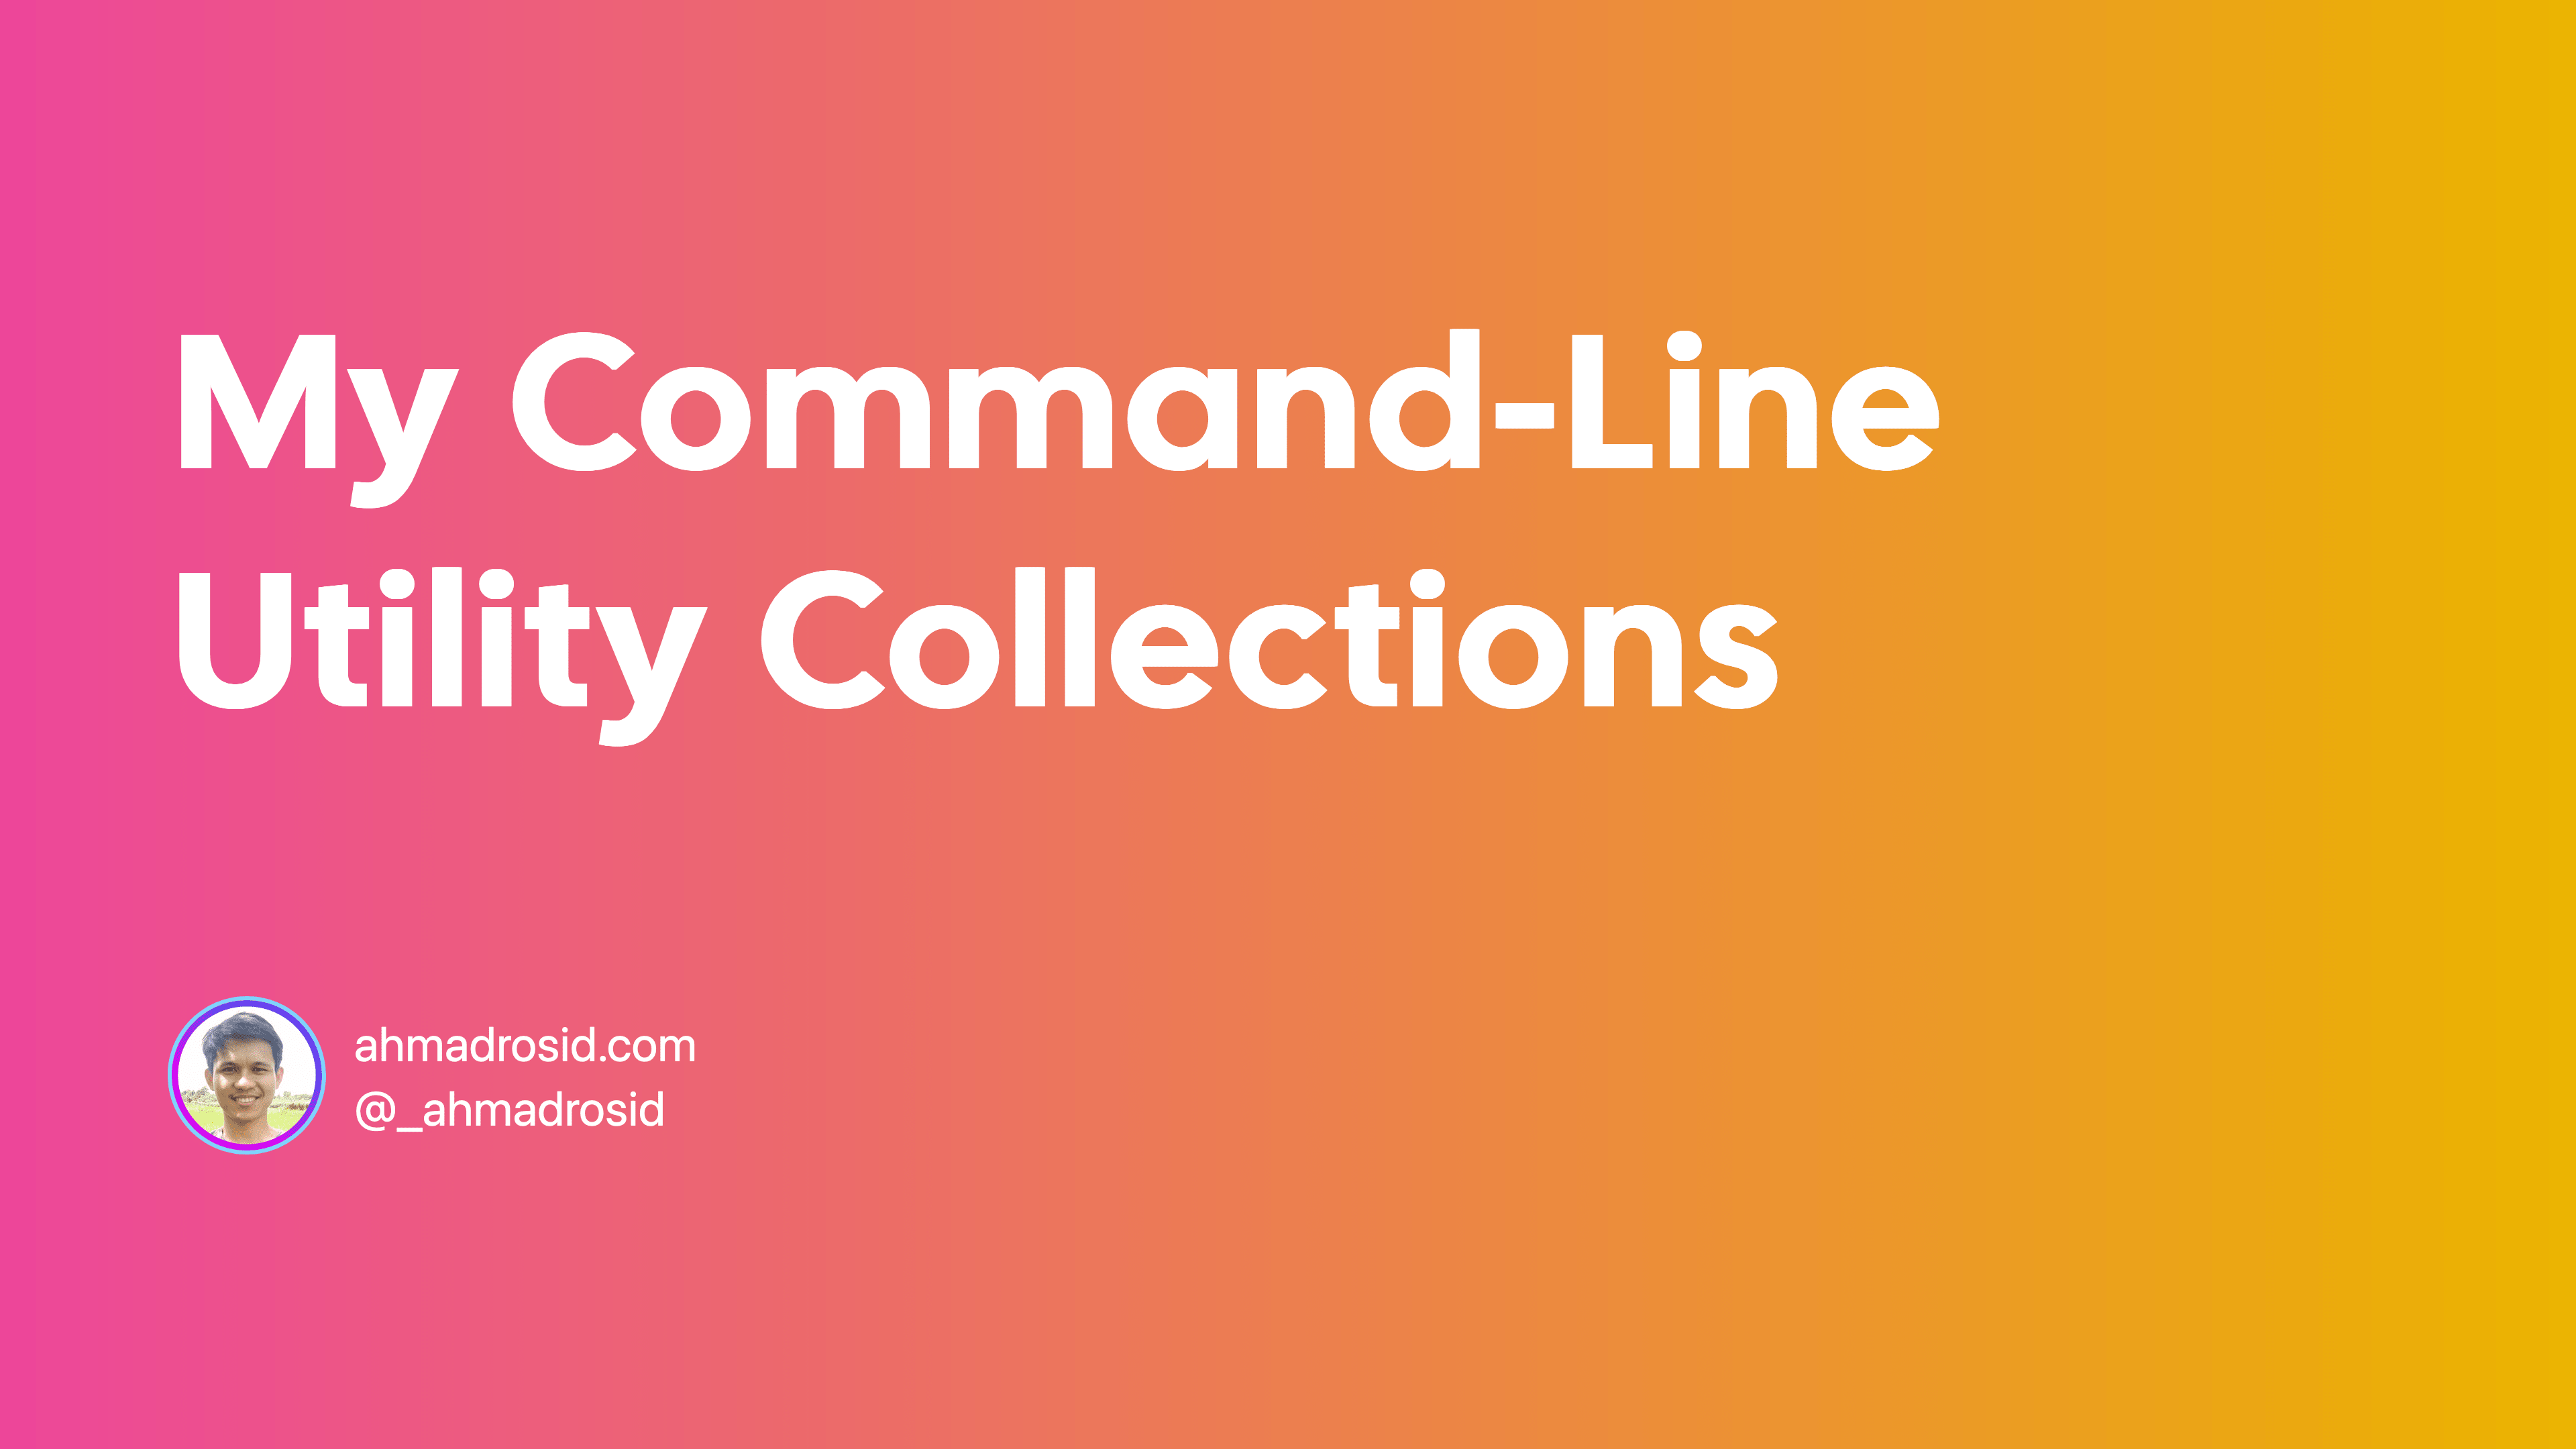 My Command-Line Utility Collections